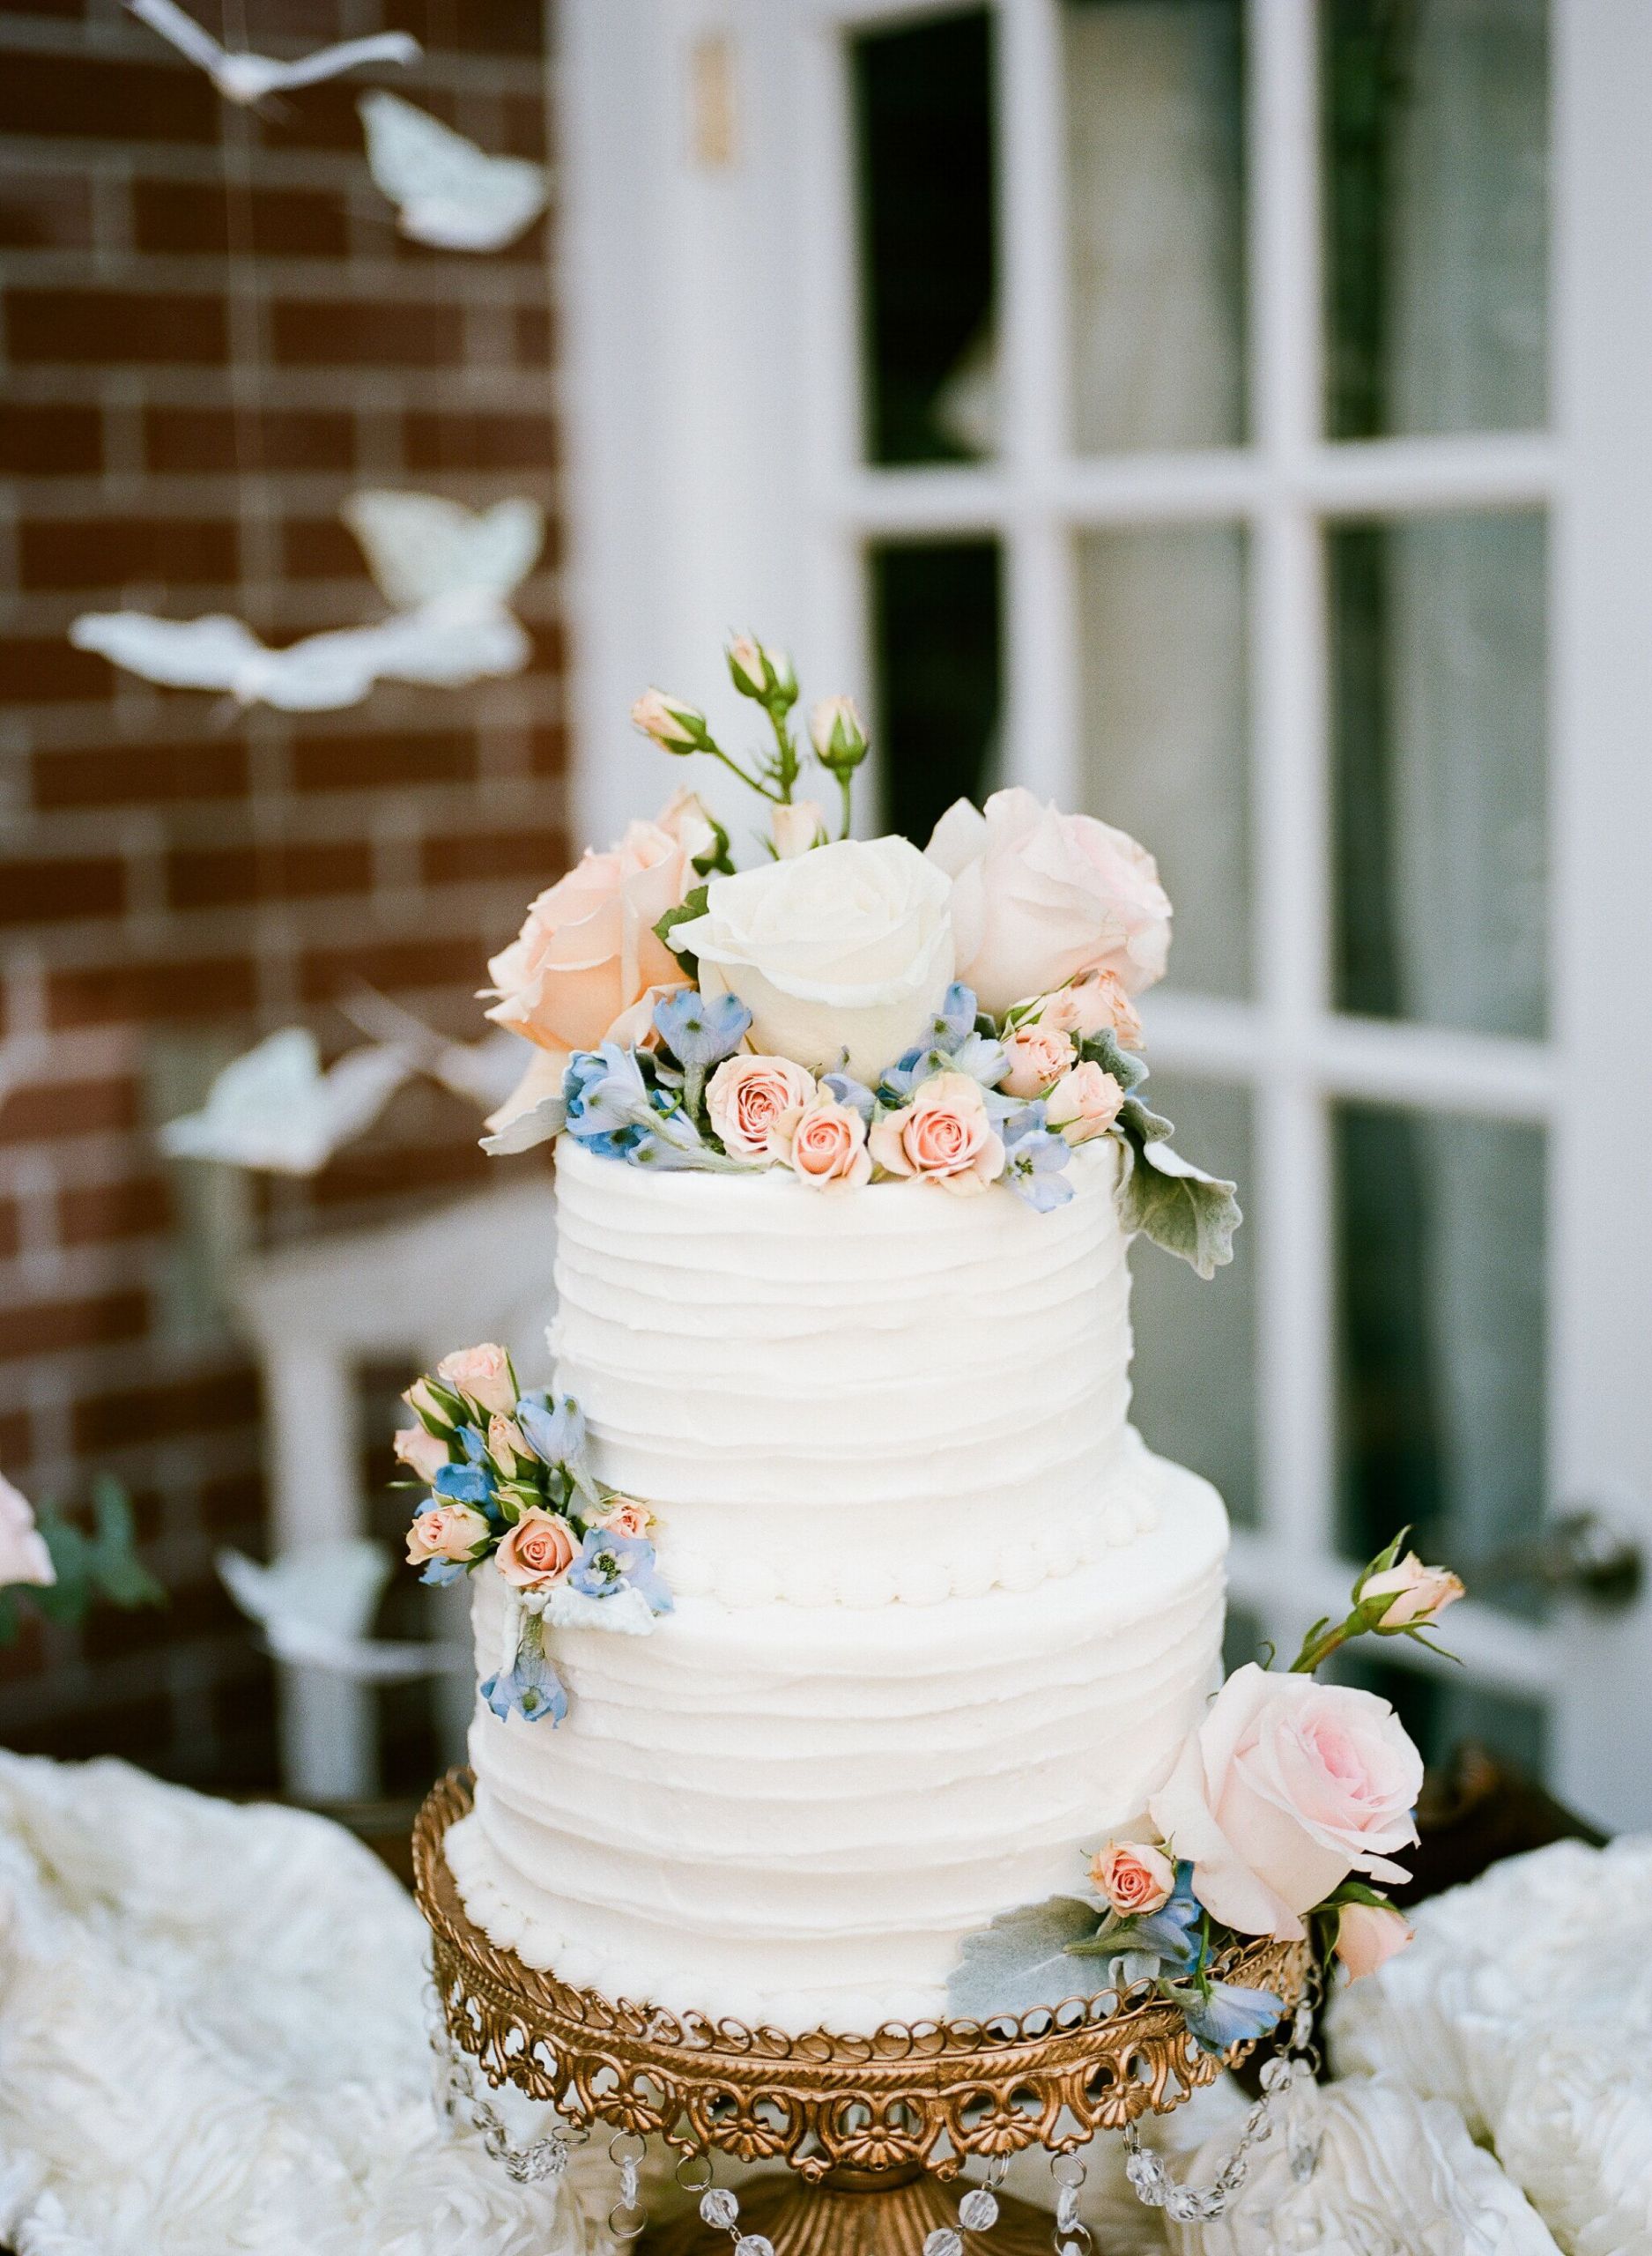 Wedding Cake With Flowers
 Buttercream Wedding Cake With Blush and Blue Flowers